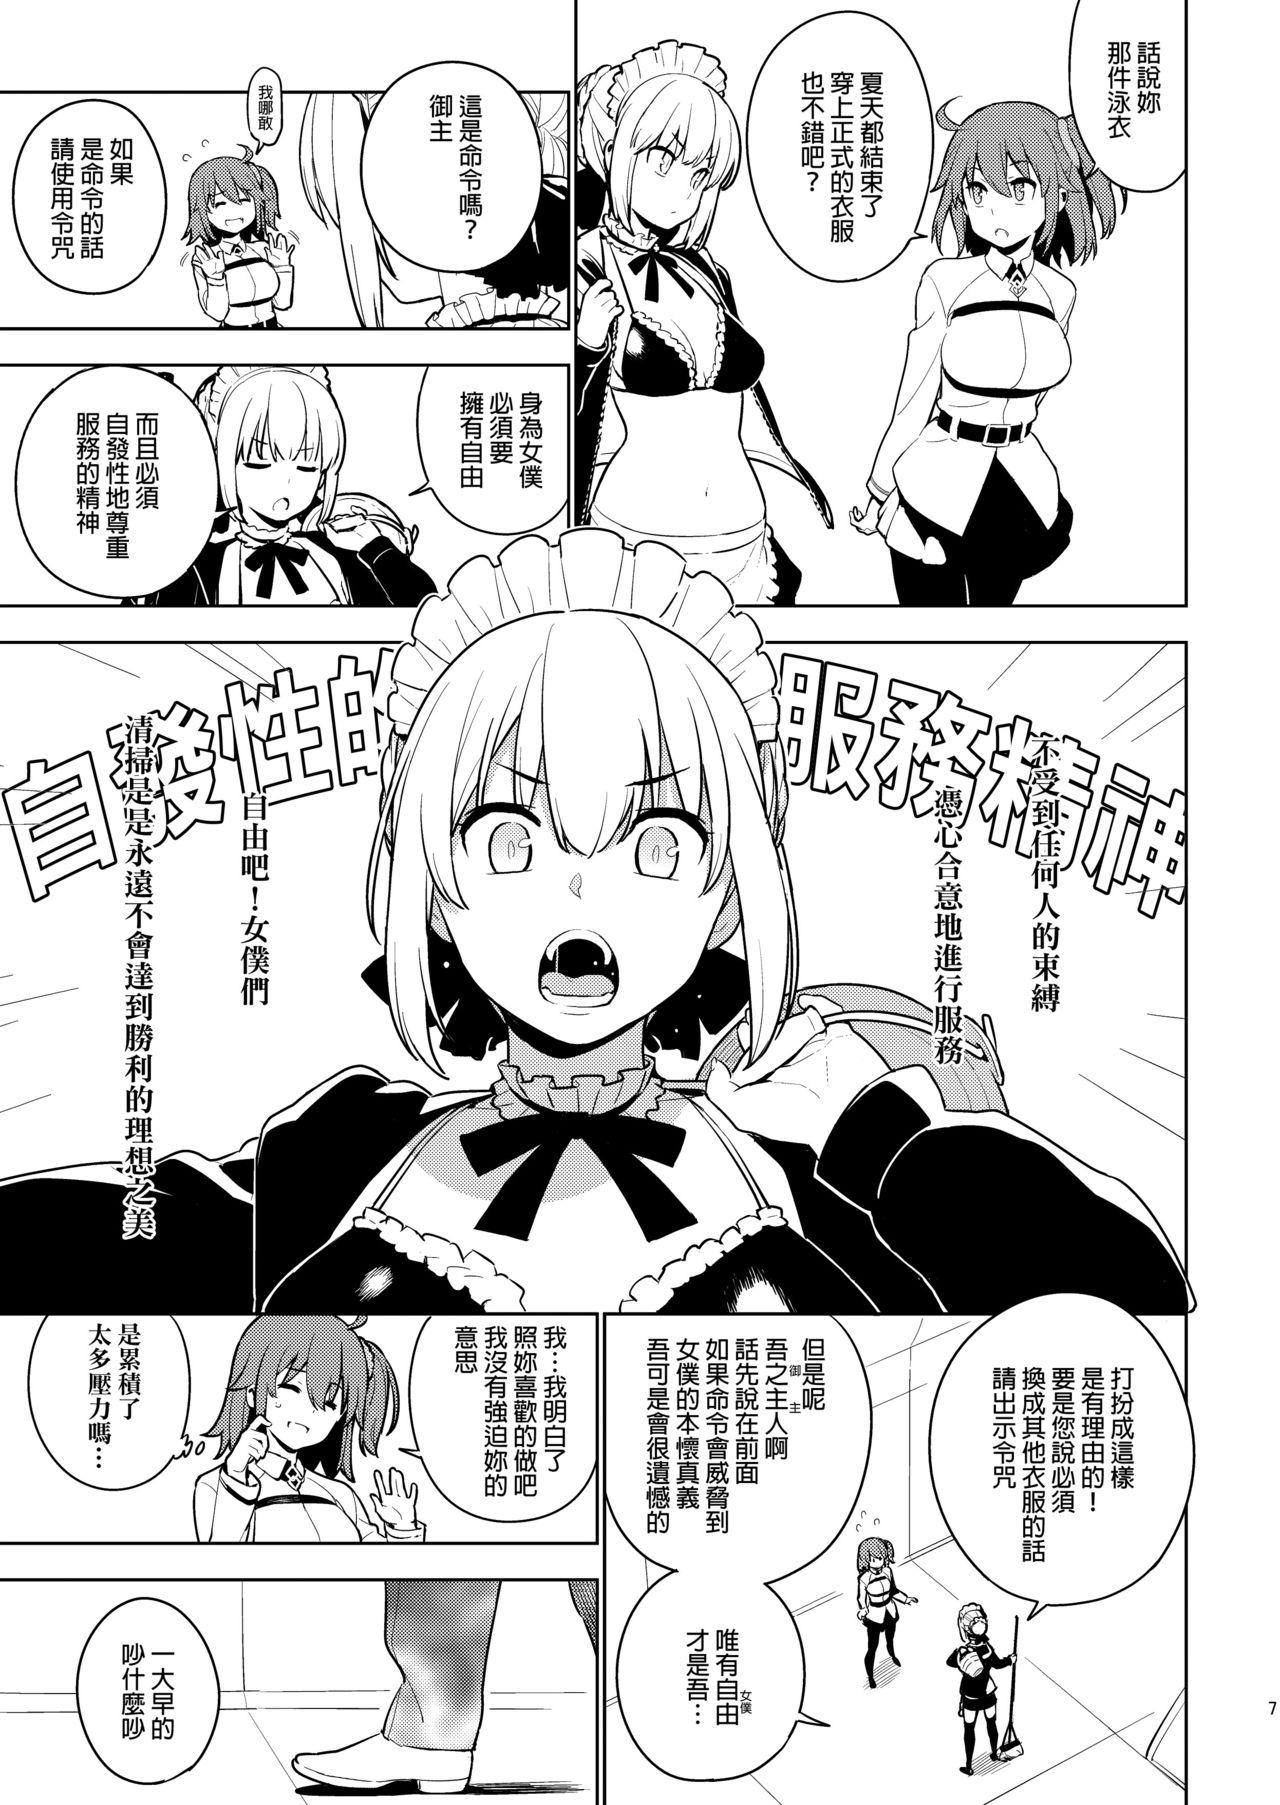 Perfect Body DELUSION - Fate grand order Gay Bukkakeboys - Page 6